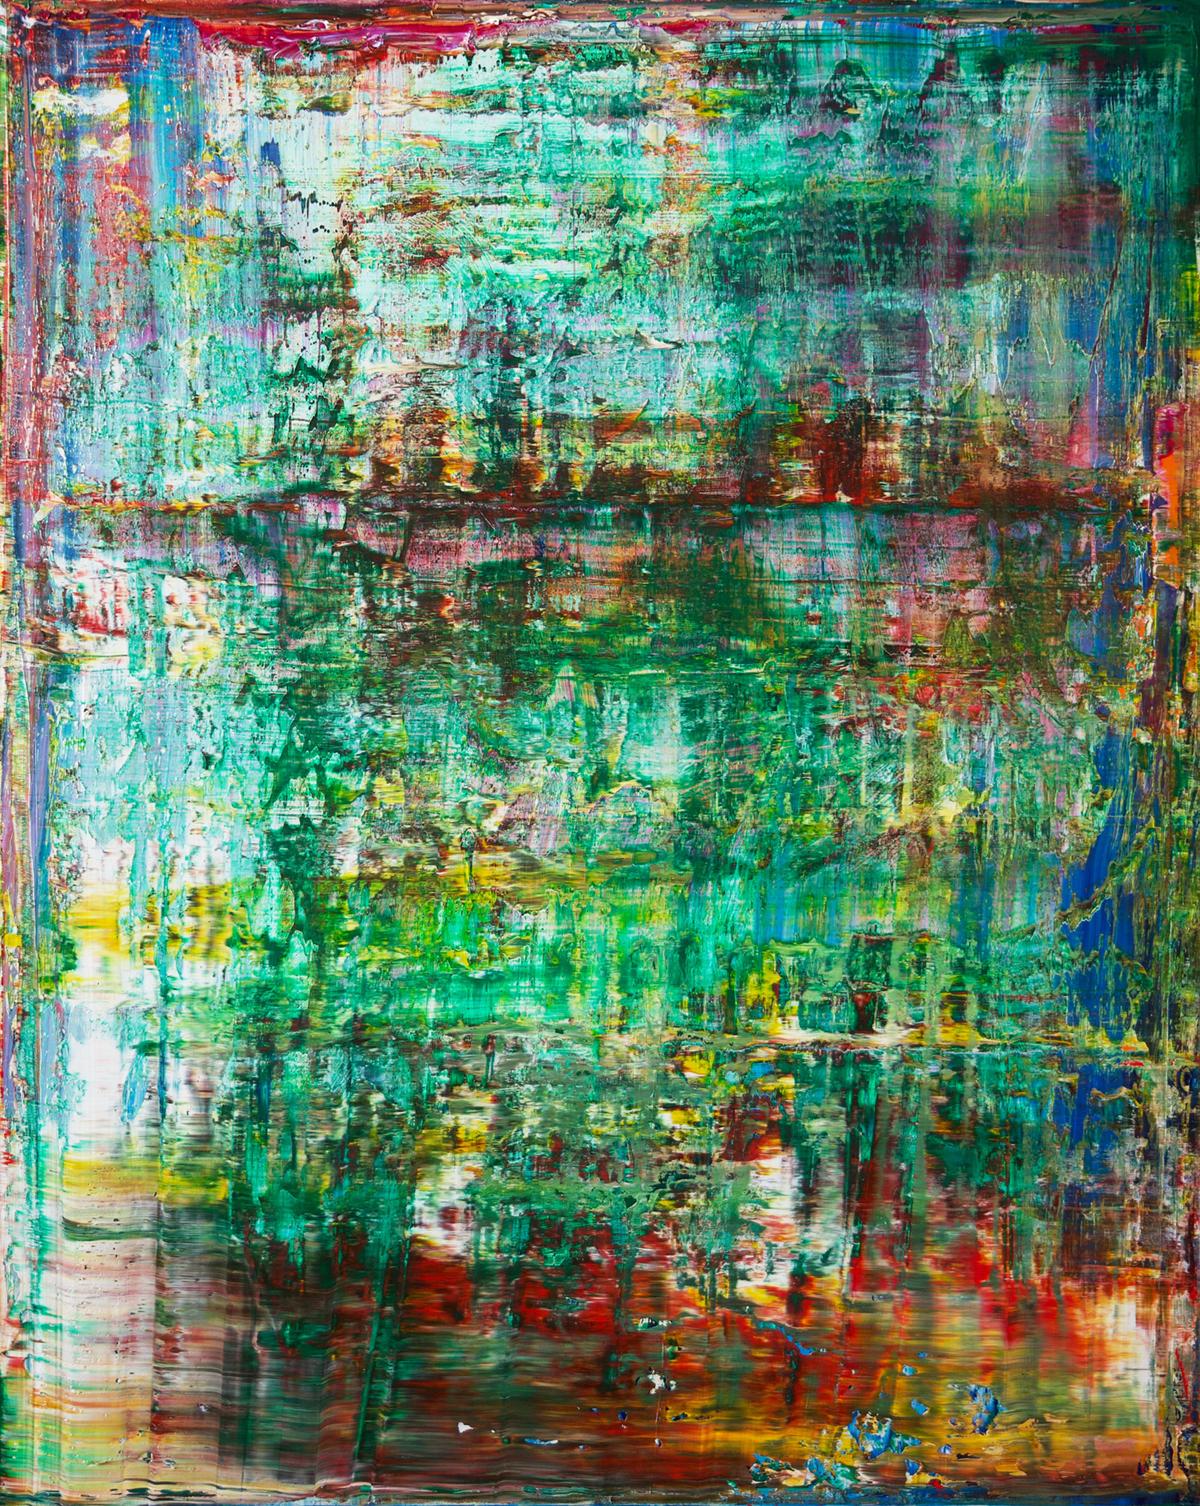 Abstract Painting Harry James Moody - Art contemporain allemand de Harry Moody - Abstract Green n°424